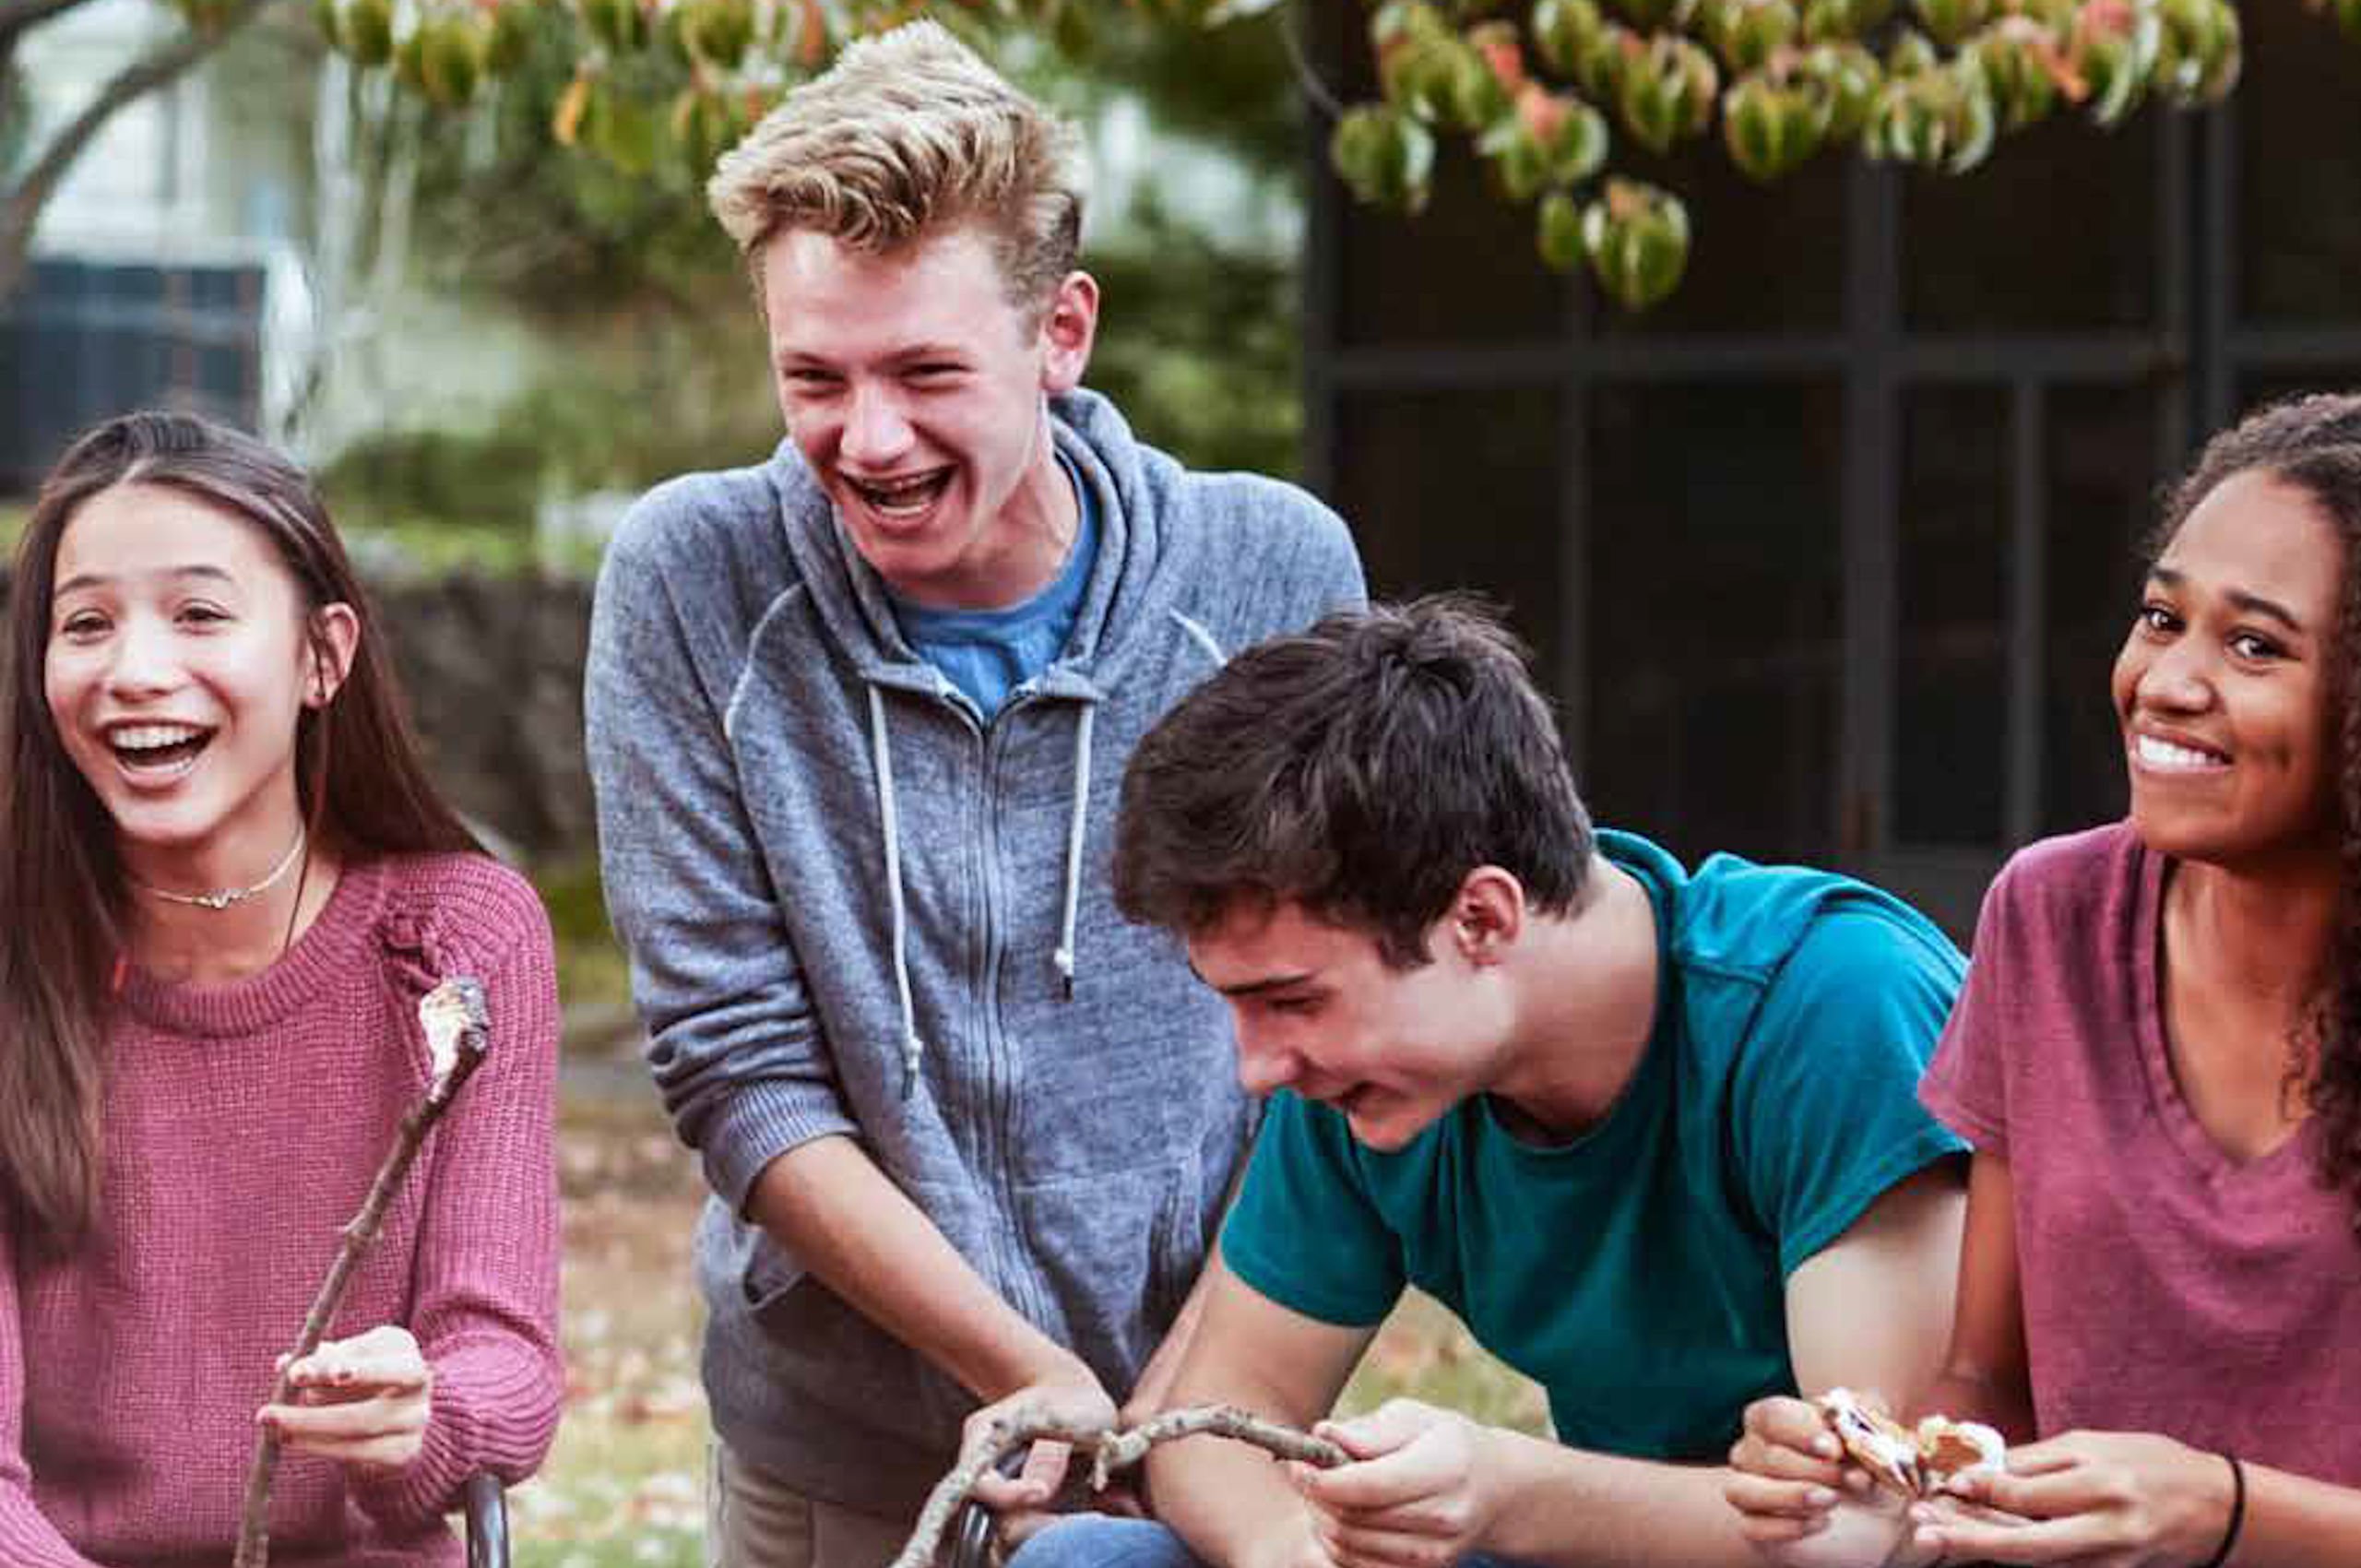 Four teenagers outdoors laughing and roasting marshmallows